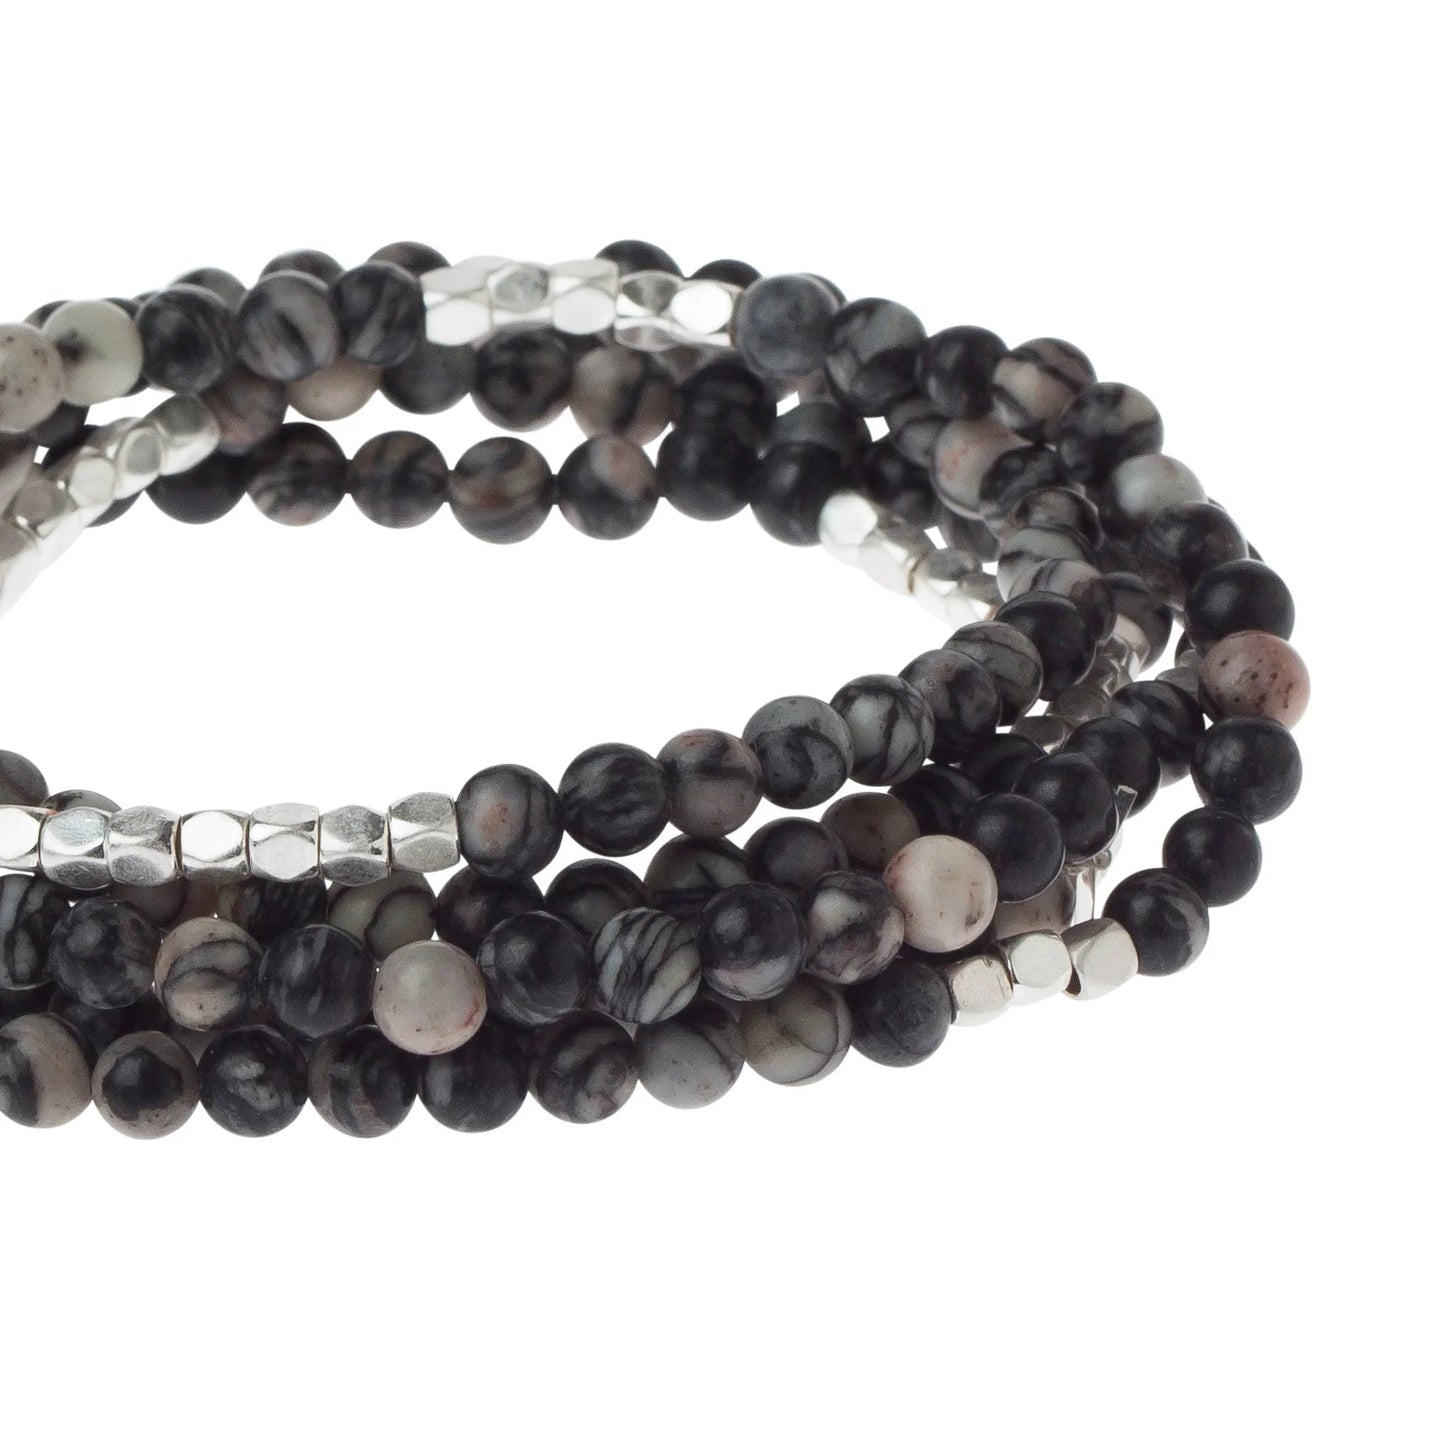 Scout Curated Wears Stone Wrap Bracelet/Necklace - Black Network Agate - Stone of Inner Stability available at The Good Life Boutique